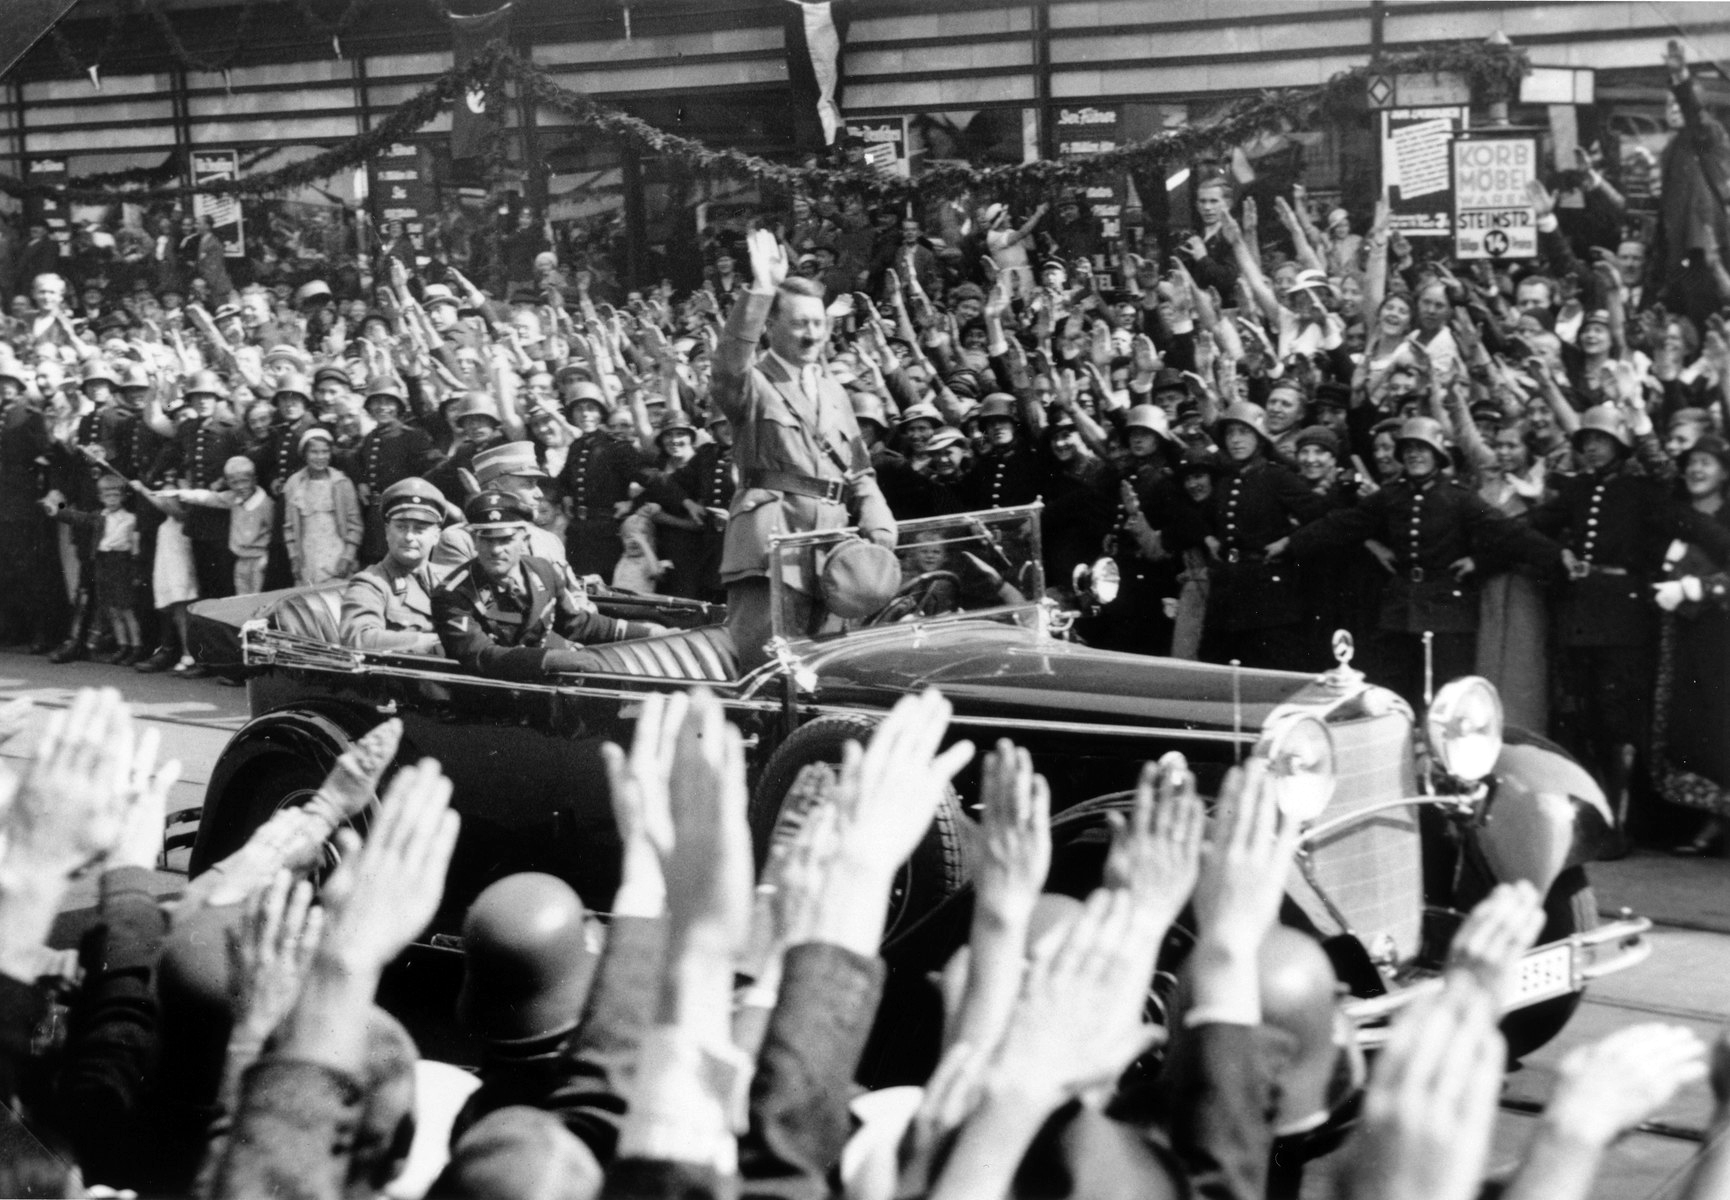 Standing in an open car, Adolf Hitler salutes a crowd lining the streets of Hamburg